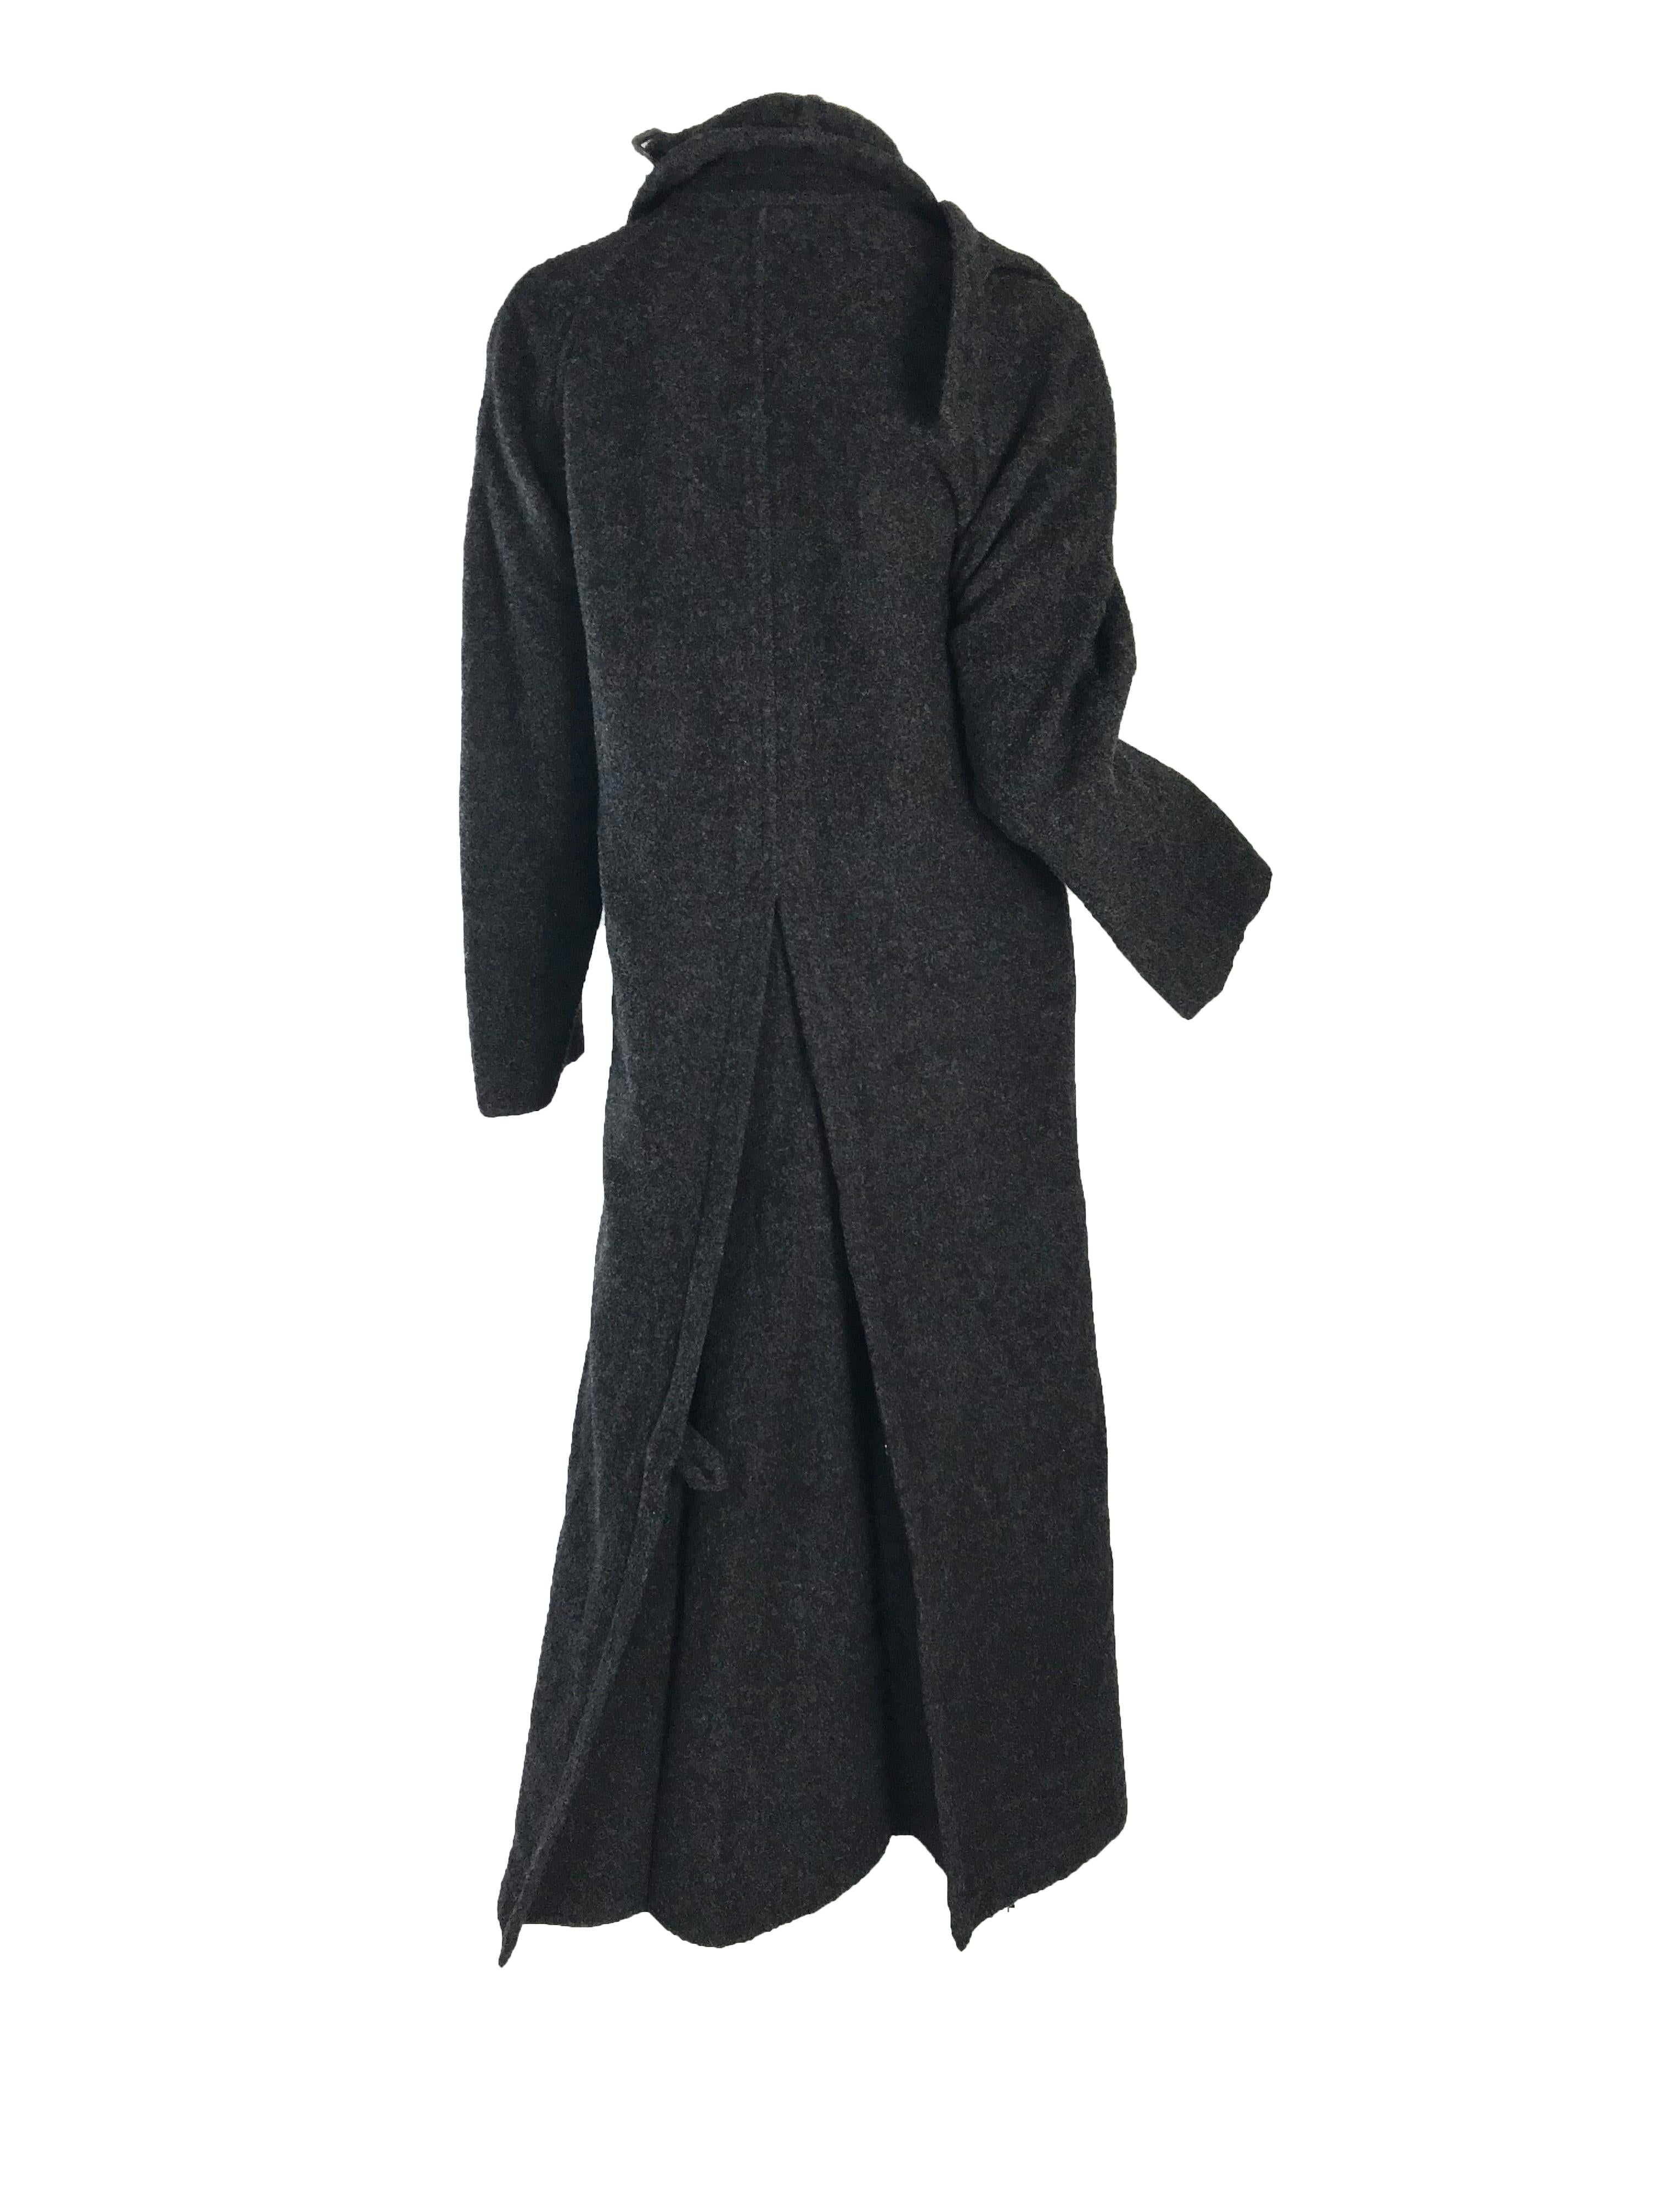 1990s Comme des Garcons oversized black wool coat with hook / eye closures. 

Condition: AS IS, multiple moth nicks
Made in Japan
Size M